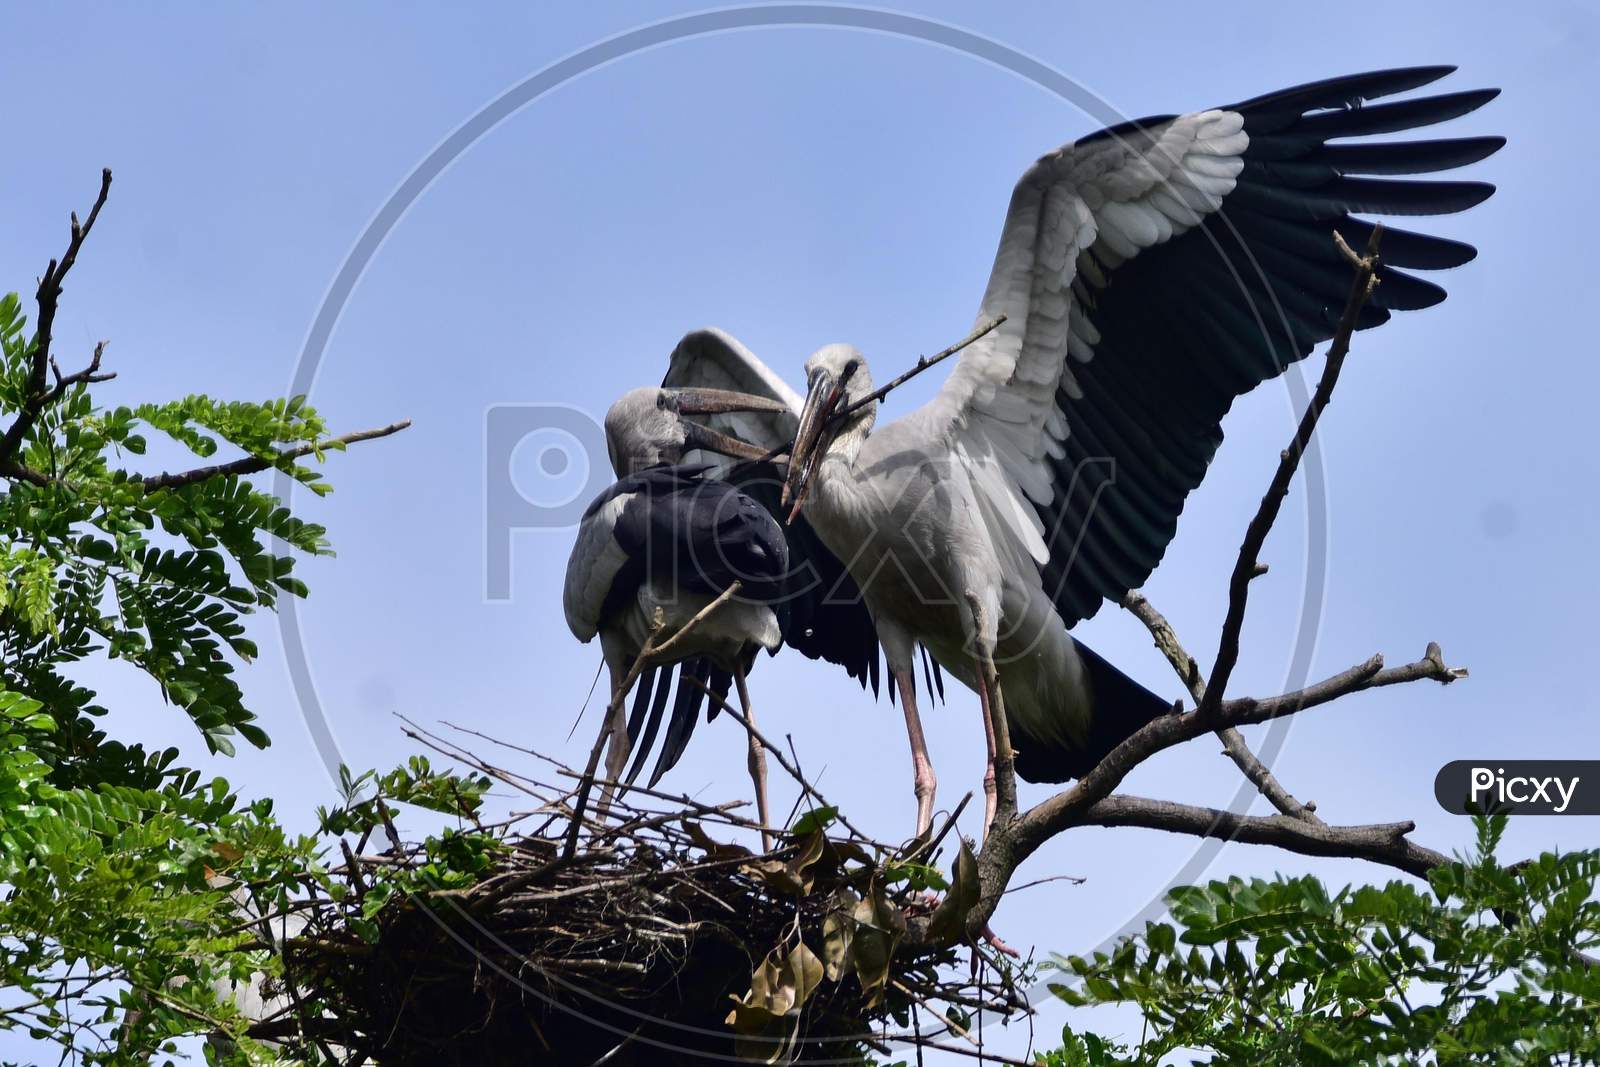 A Pair Of Openbill Storks Sitting On The Branches Of A Tree In Nagaon District Of Assam on August 10,2020.